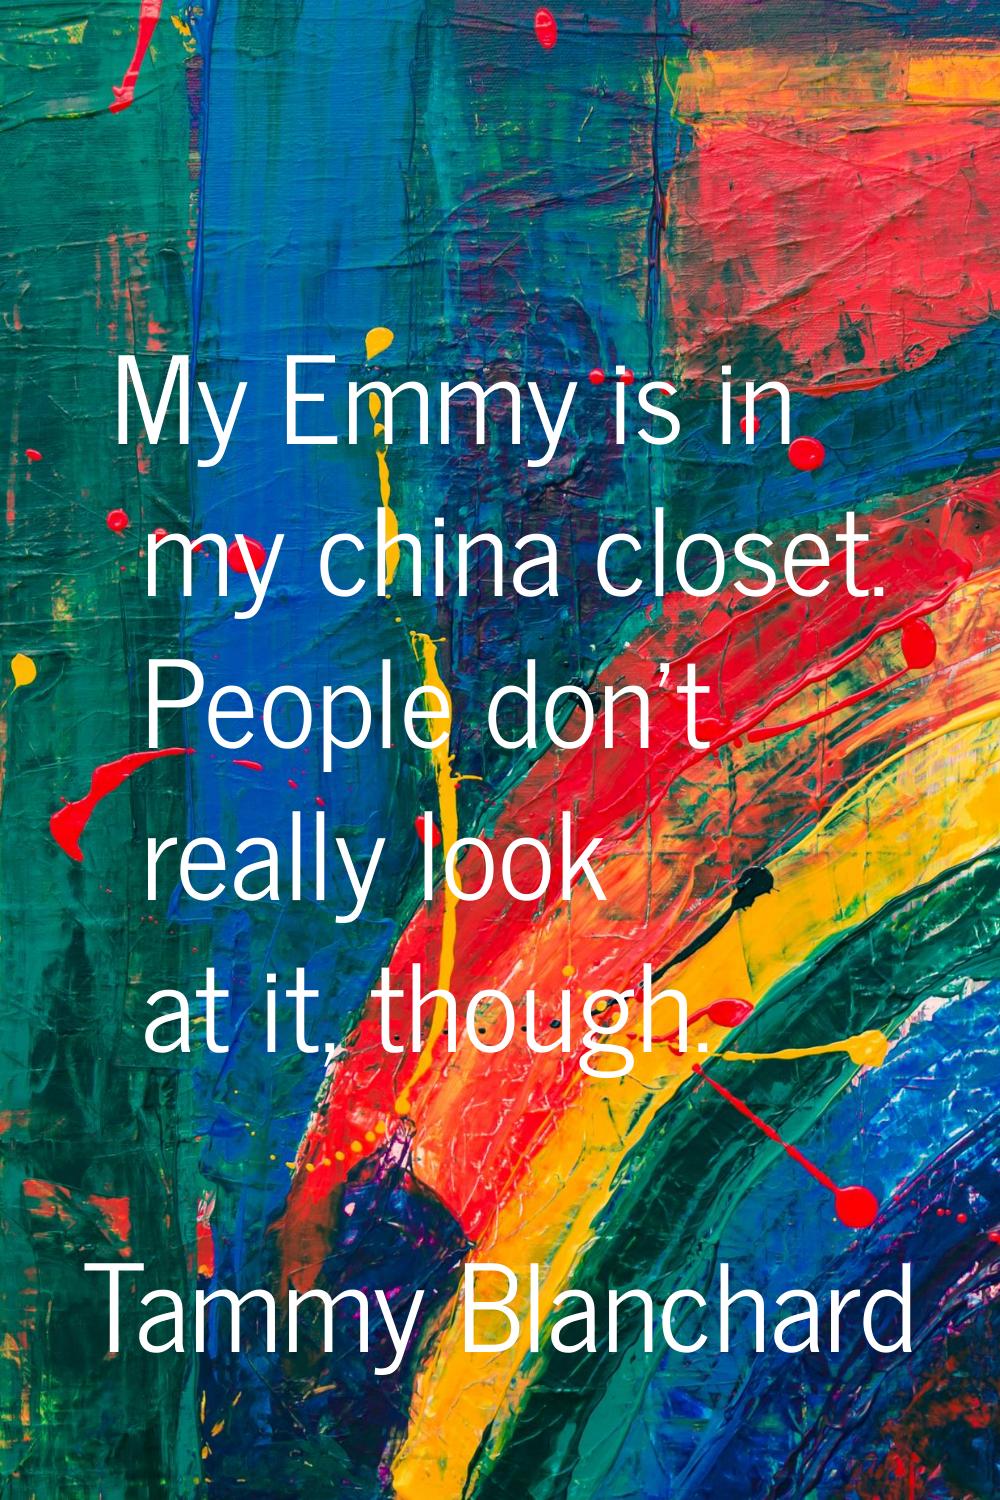 My Emmy is in my china closet. People don't really look at it, though.